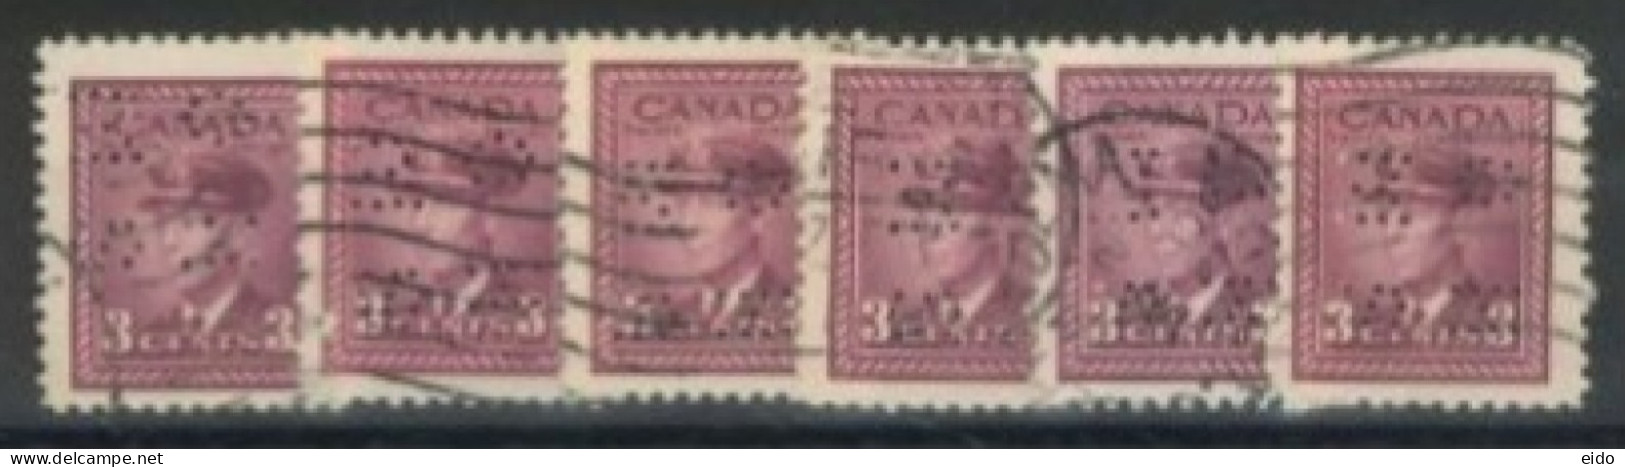 CANADA - 1942, KING GEORGE VI IN NAVAL UNIFORM STAMPS QTY. OF 6, WITH REDUCED SPECIAL PRICE, USED. - Oblitérés